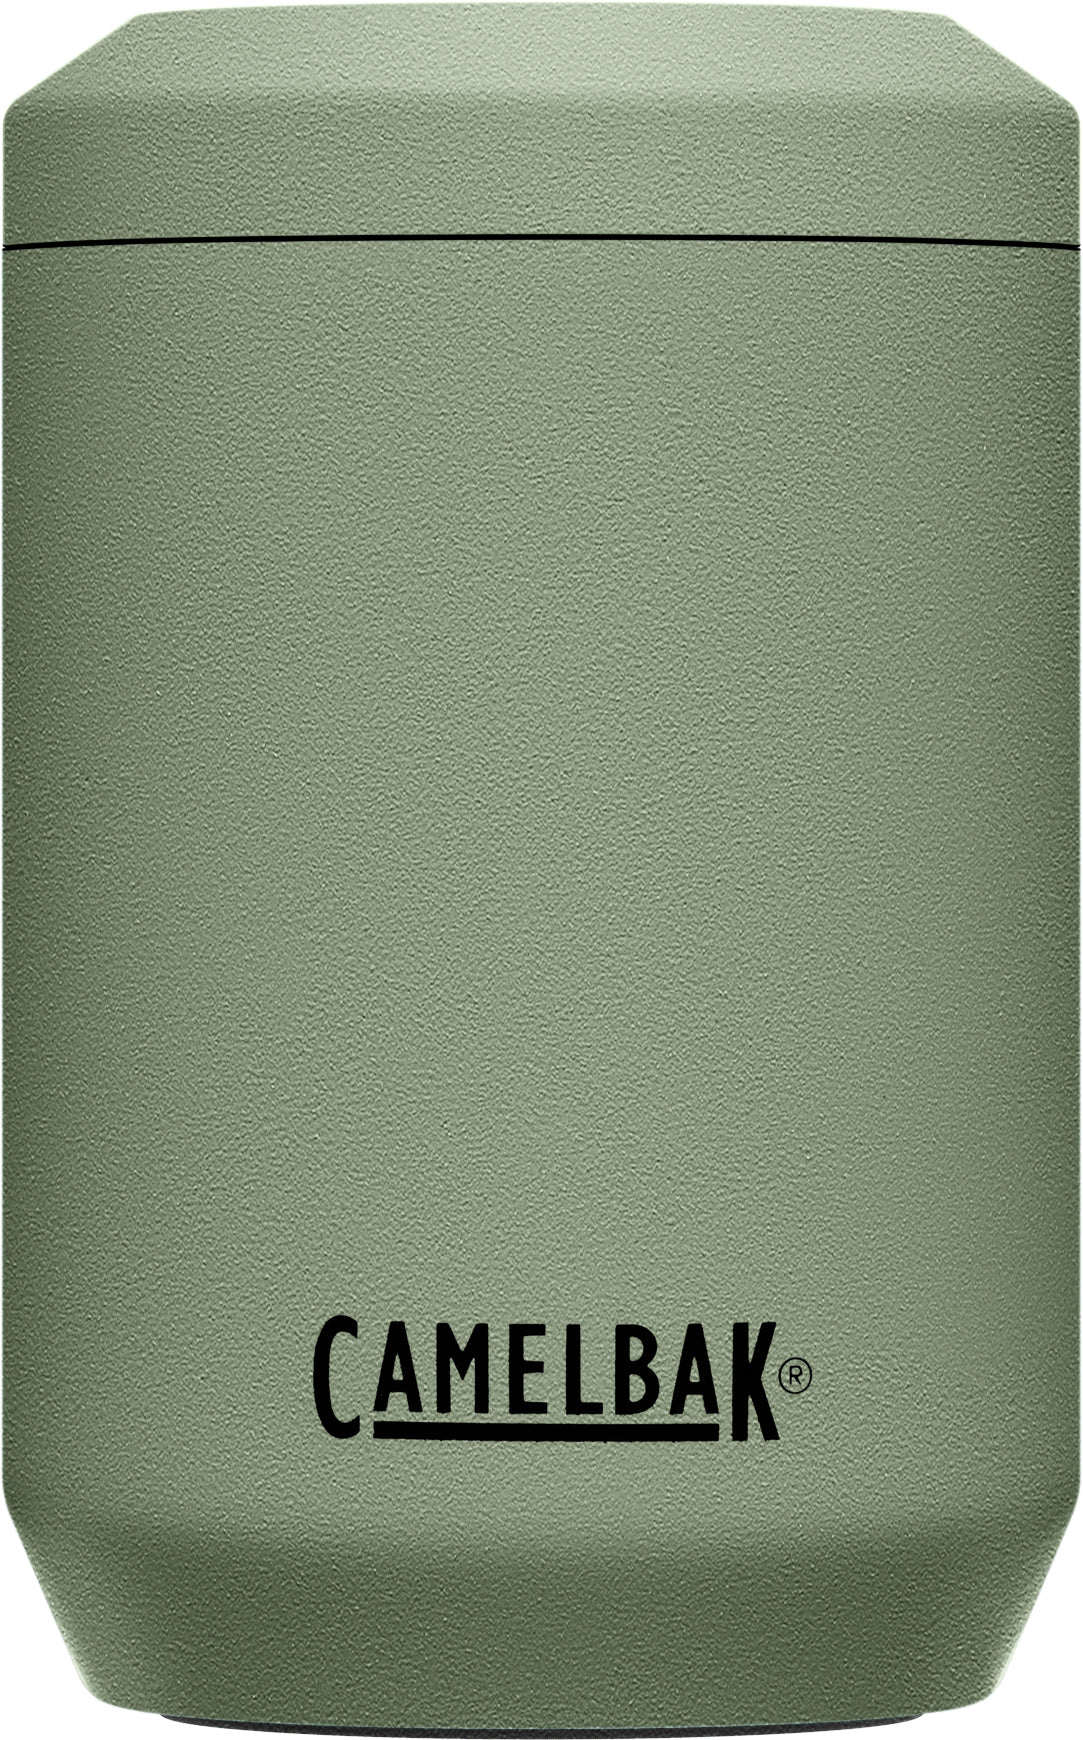 Camelbak|CAN_COOLER_VACUUM_INSULATED|Cycle_LM